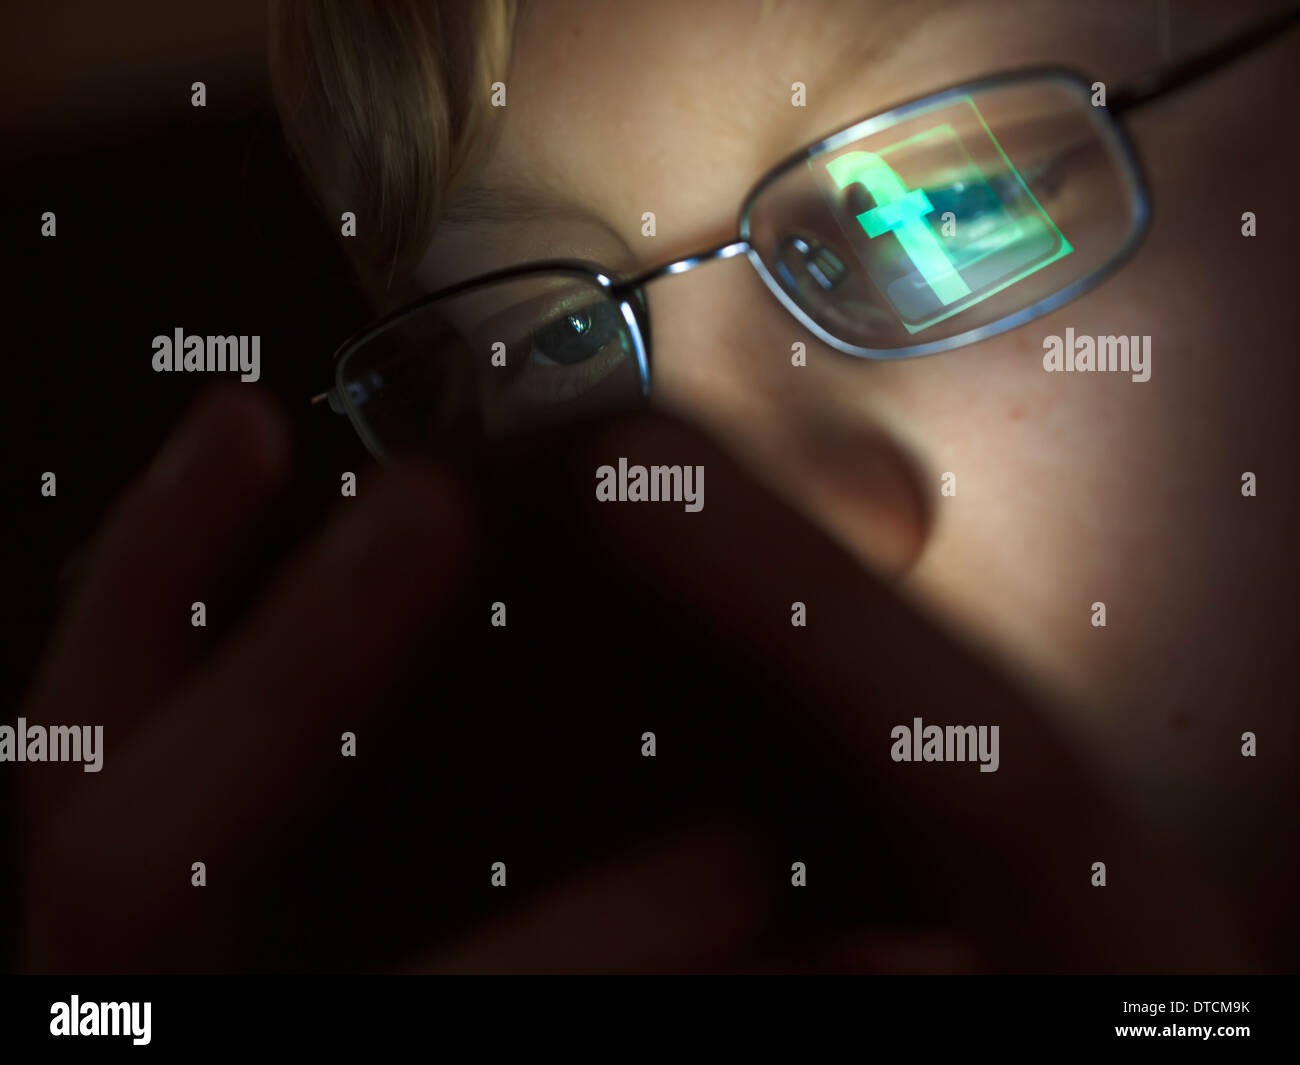 A teenage boy is surfing the internet using his iPhone, with the Facebook logo being reflected in the boy's glasses. Stock Photo